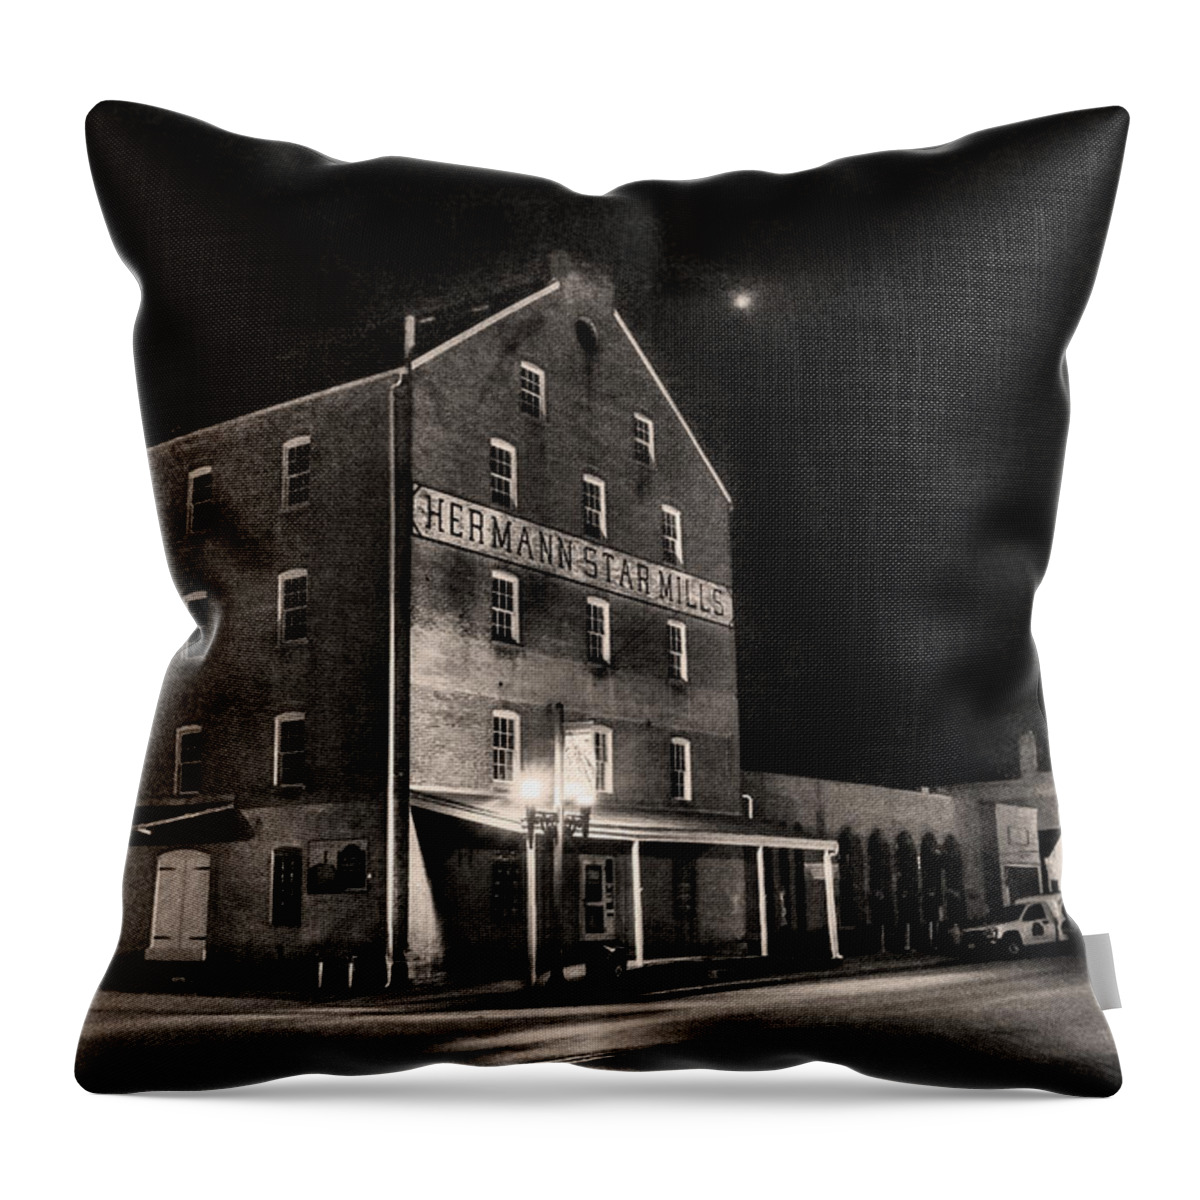 Star Mill Nocturne Throw Pillow featuring the digital art Star Mill Nocturne by William Fields